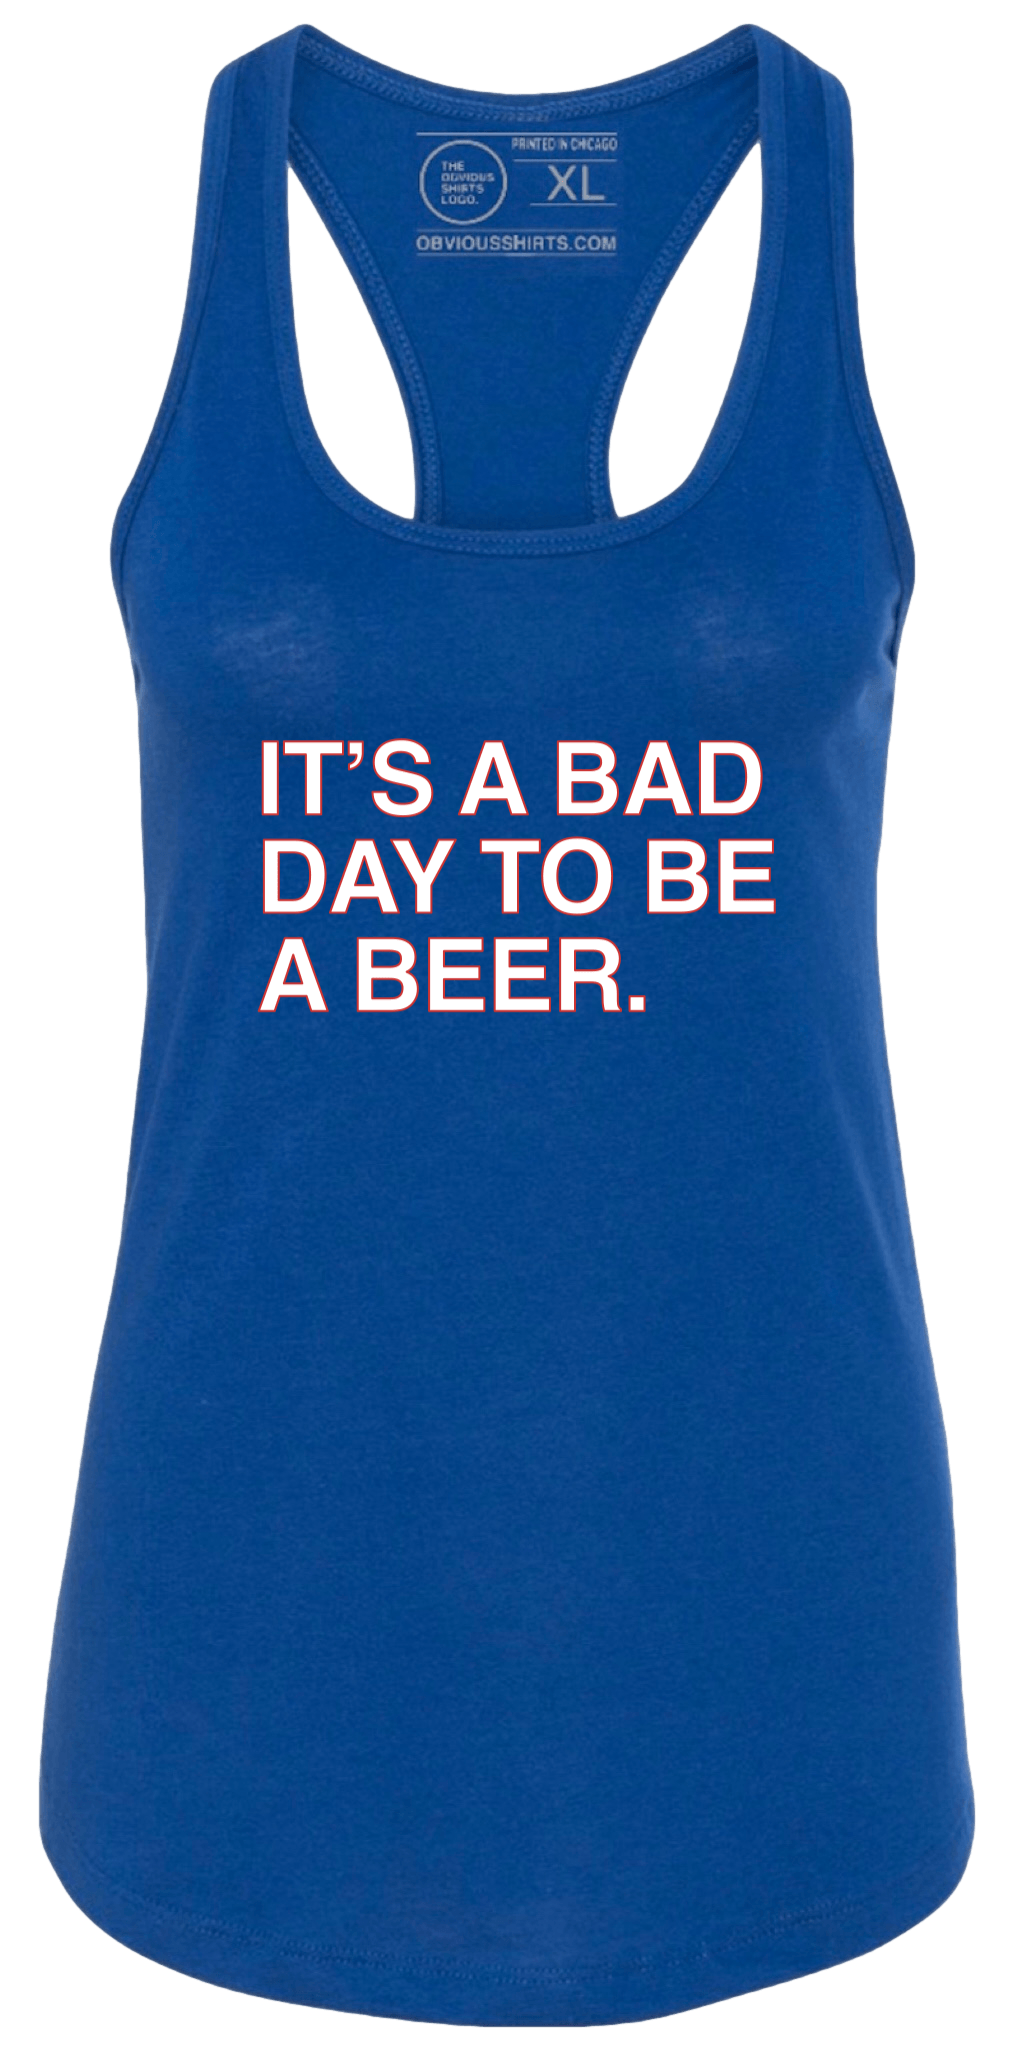 IT'S A BAD DAY TO BE A BEER. (WOMEN'S TANK) - OBVIOUS SHIRTS